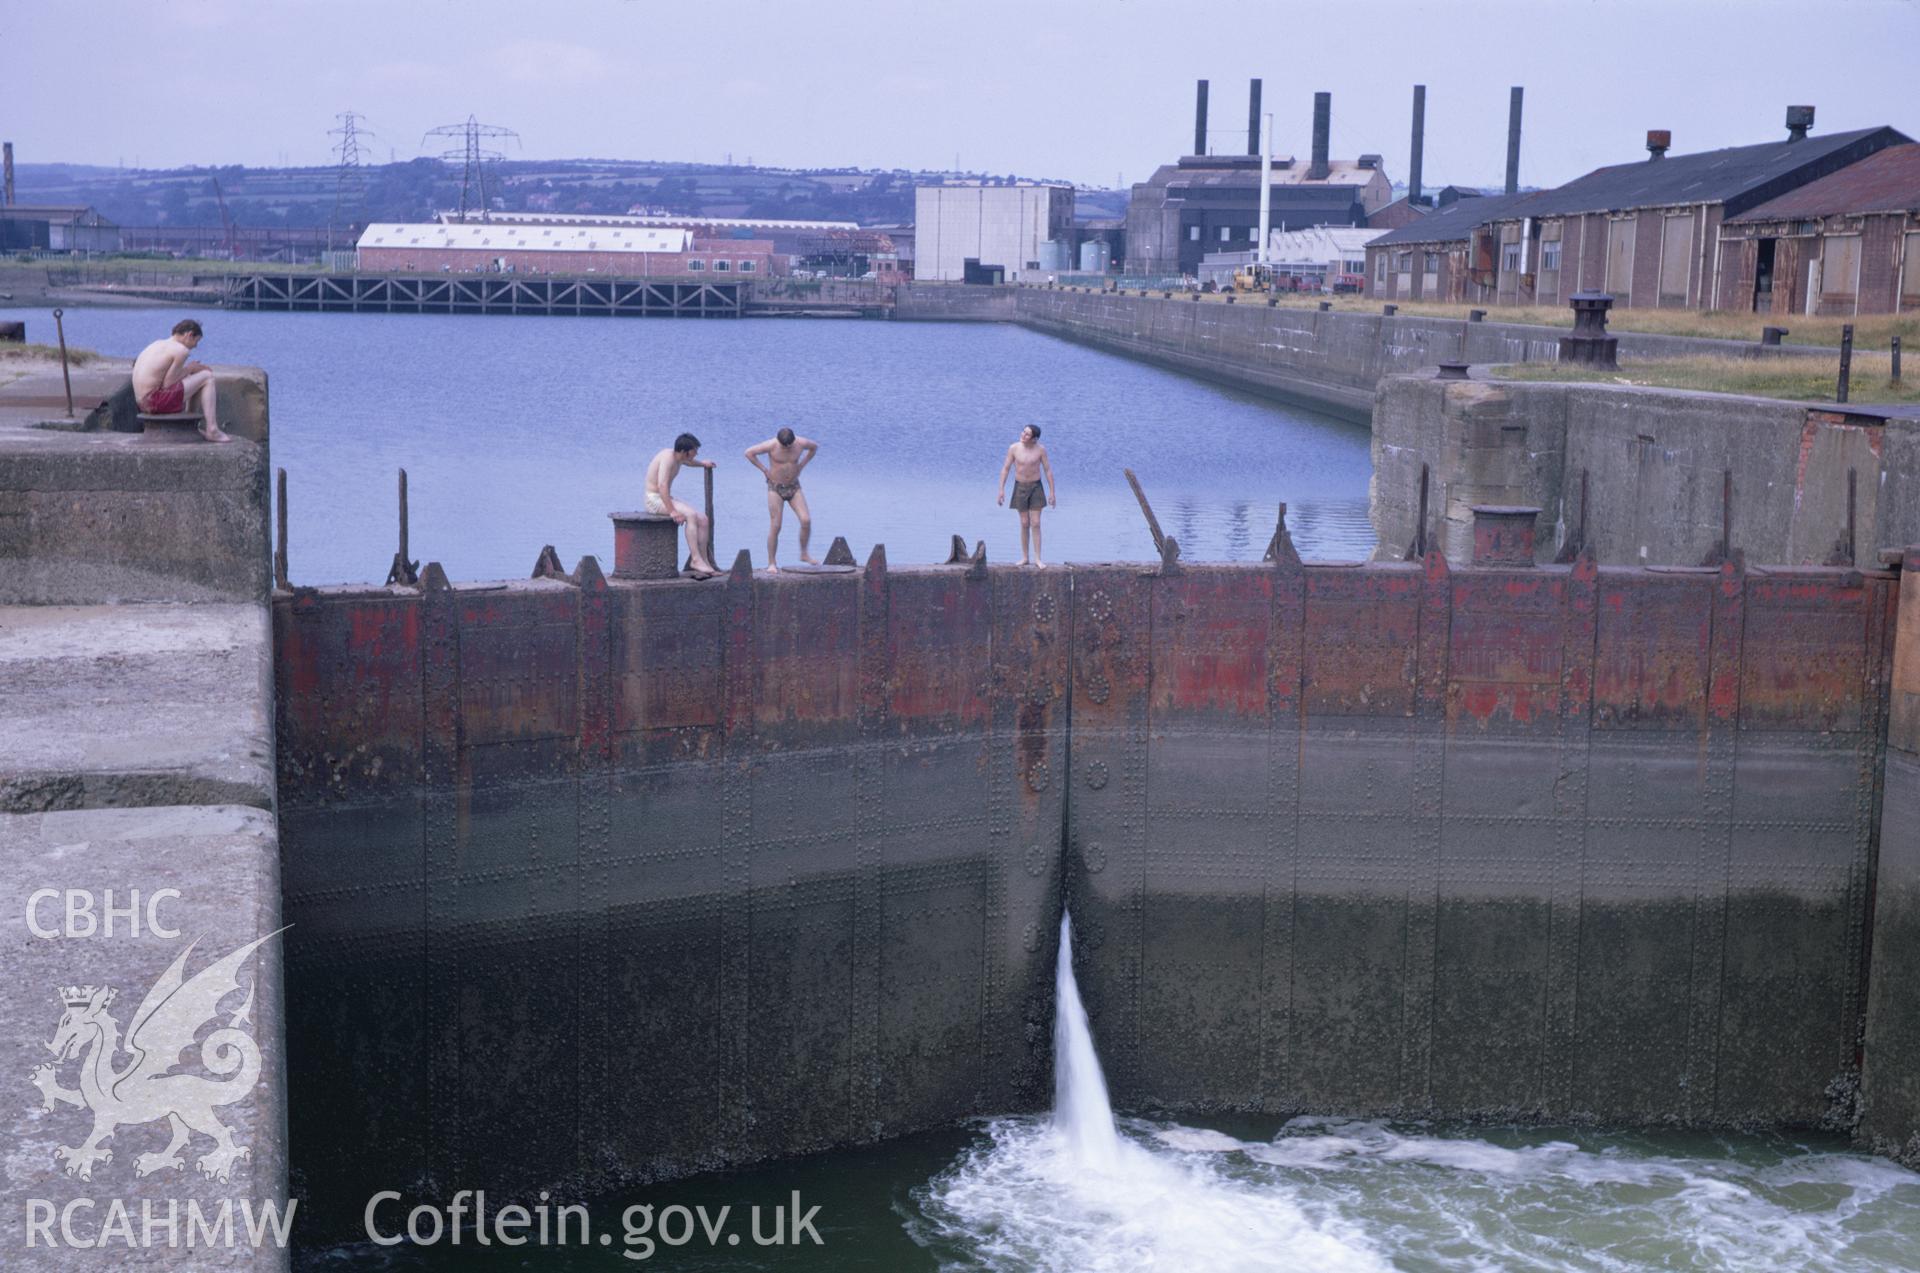 35mm Slide of the lock gates at the North Dock, Llanelli, Carmarthenshire featuring figures (boys)  in swimming costumes, by Dylan Roberts.